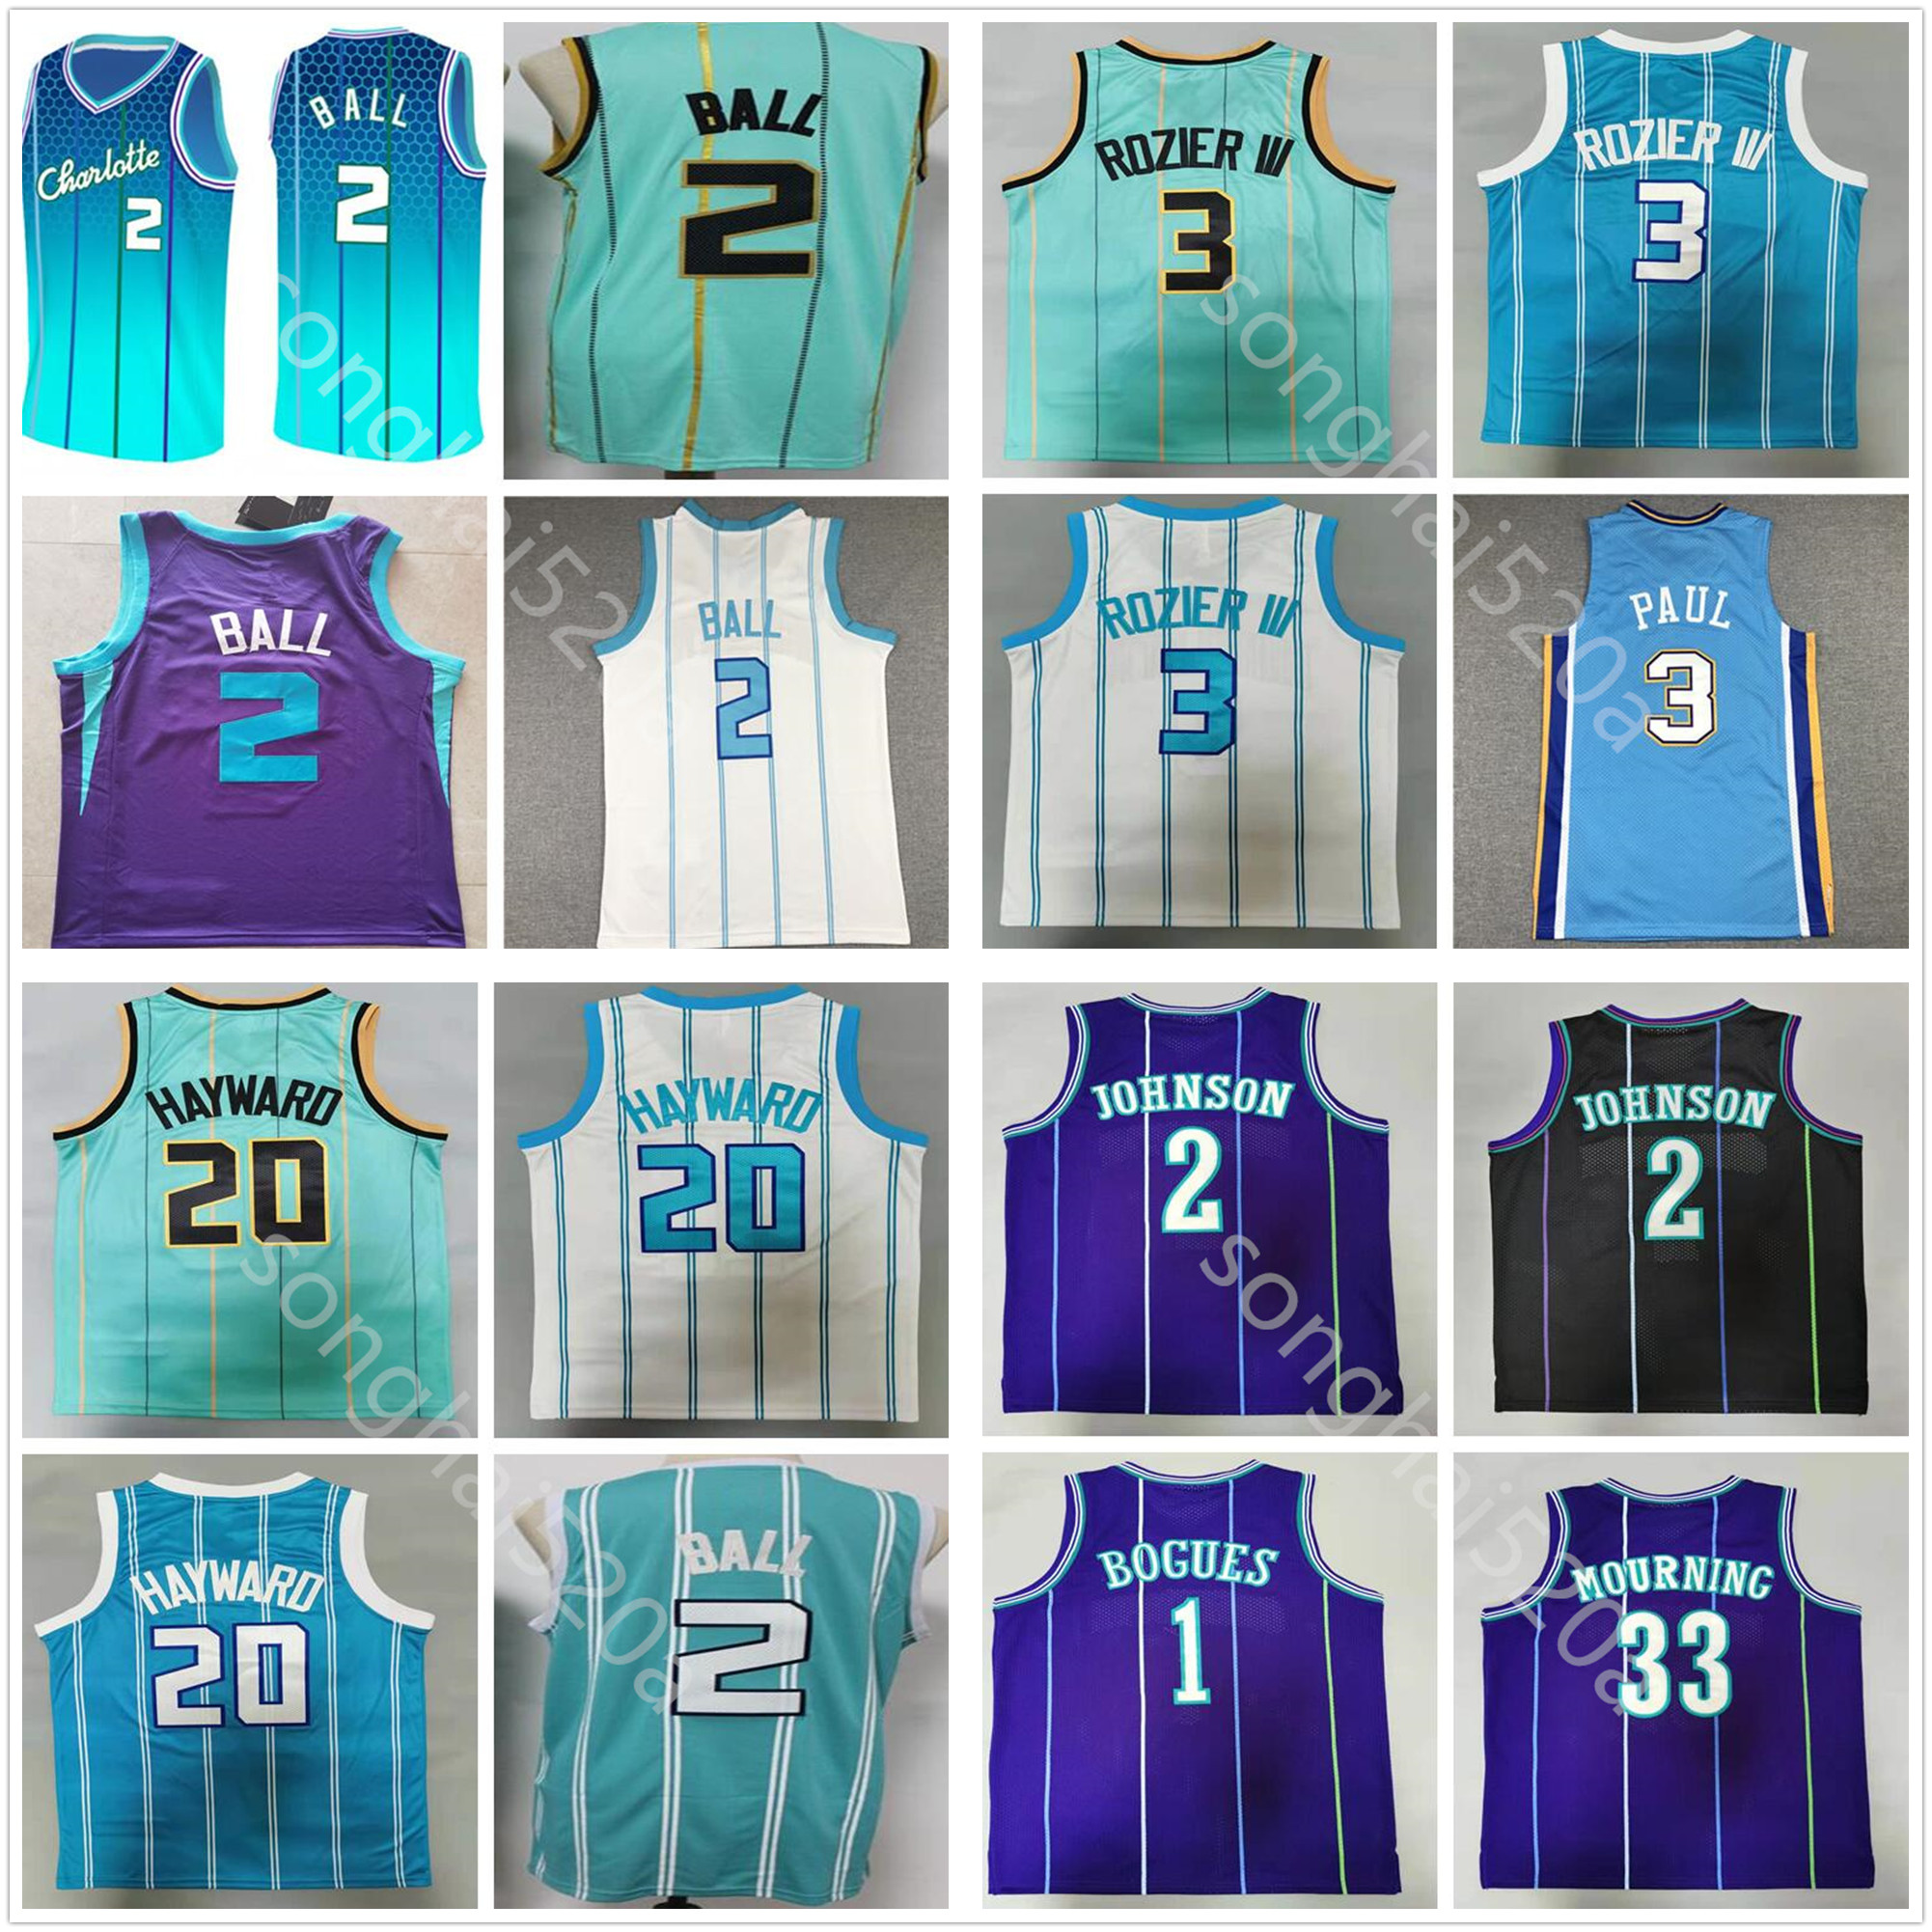 2021/22 Mens LaMelo 2 Ball Basketball Jerseys 75th City Terry 3 Rozier III 20 Gordon Retro Alonzo 33 Mourning Larry 2 Johnson 1 Bogues Curry Chris 3 Paul Shirts от DHgate WW